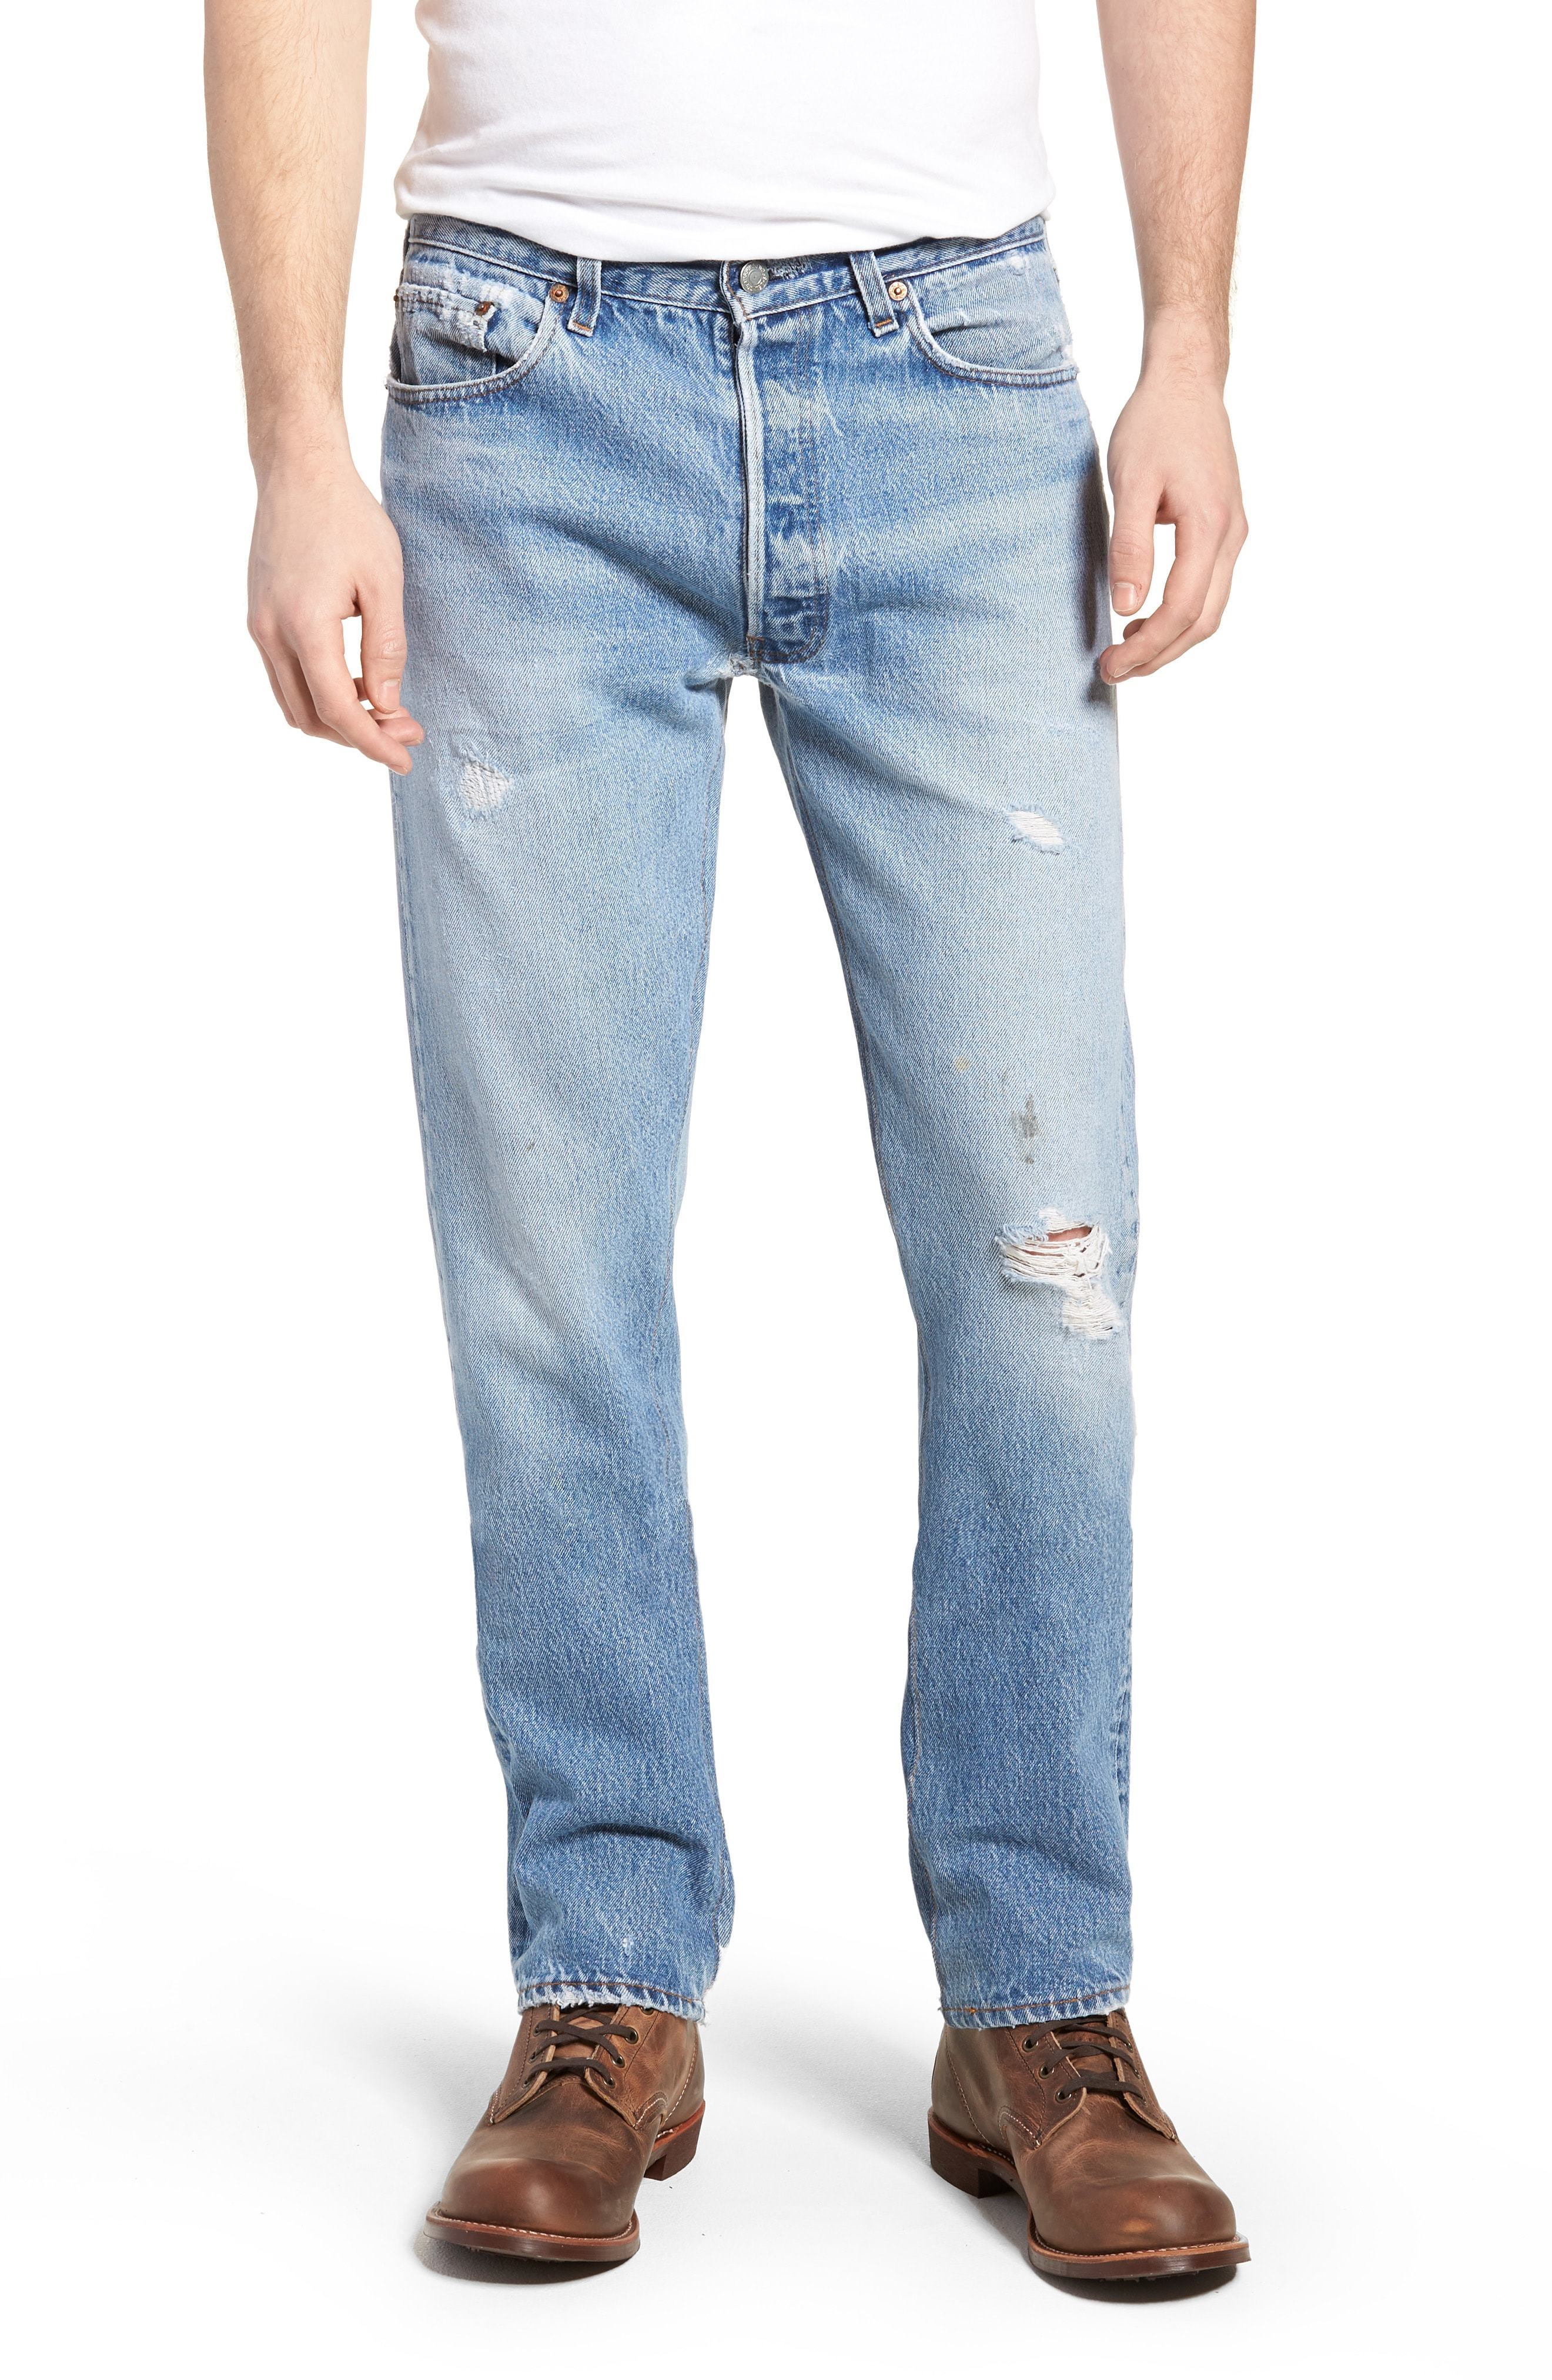 Levi's Authorized Vintage 501 Tapered Slim Fit Jeans, $113 | Nordstrom |  Lookastic